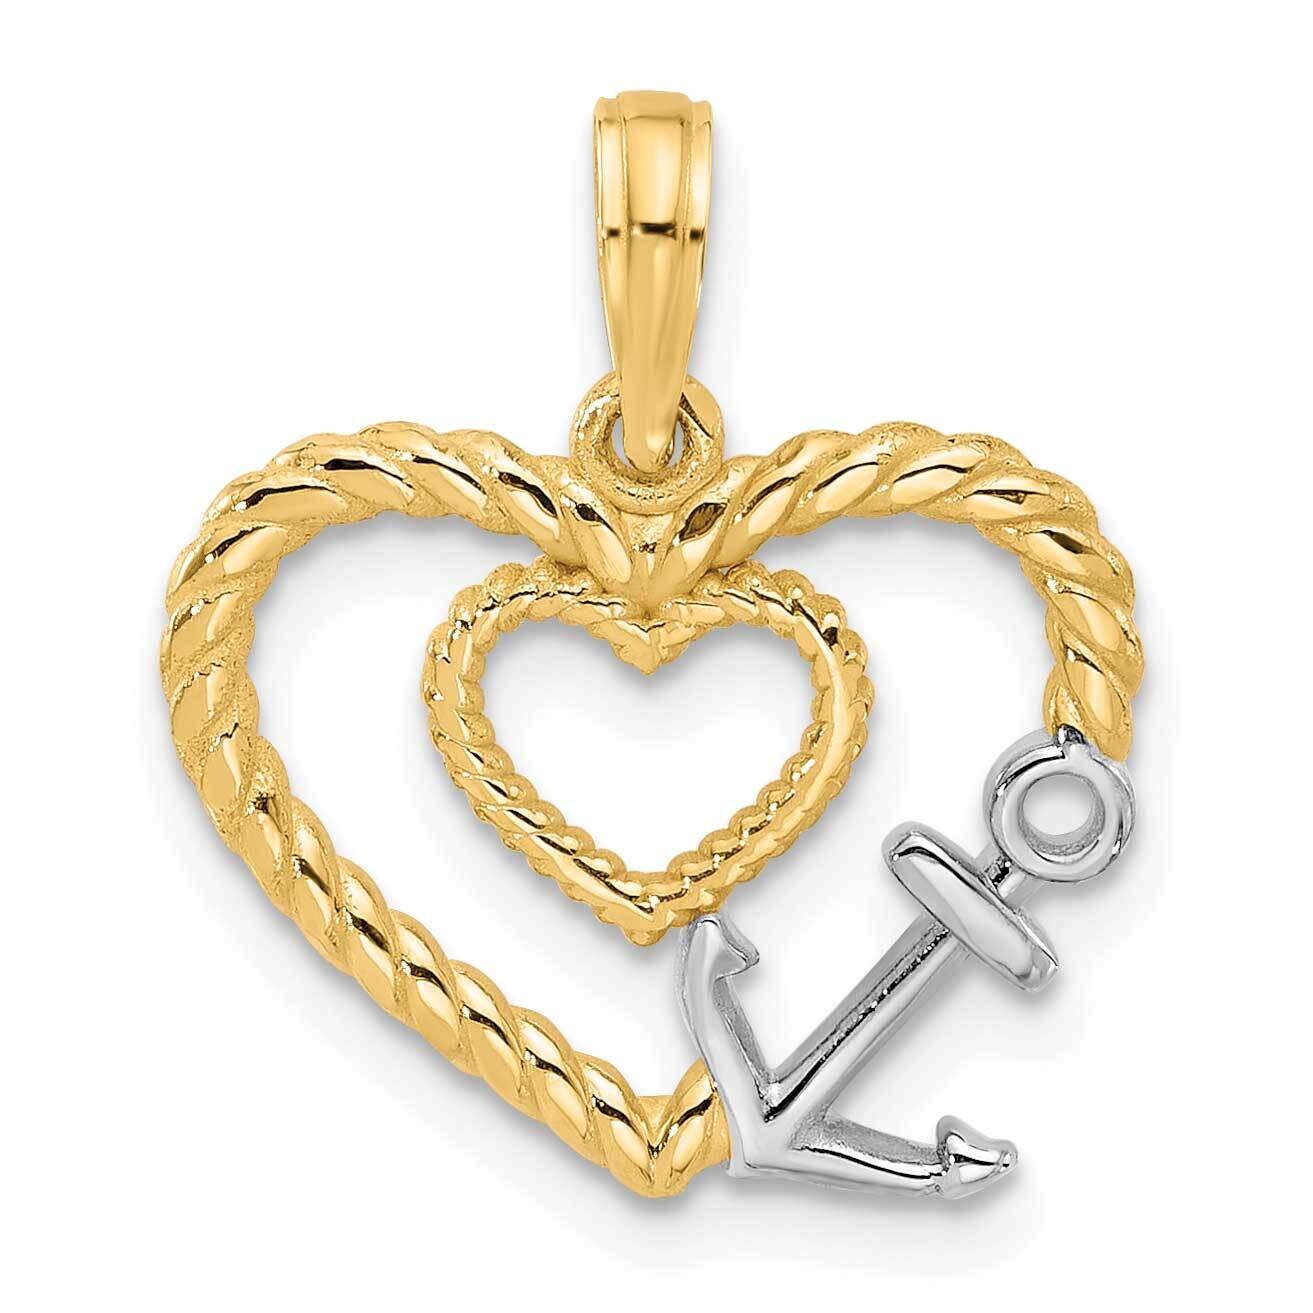 Fancy Rope Heart Anchor Charm 14k Gold With Rhodium D5456